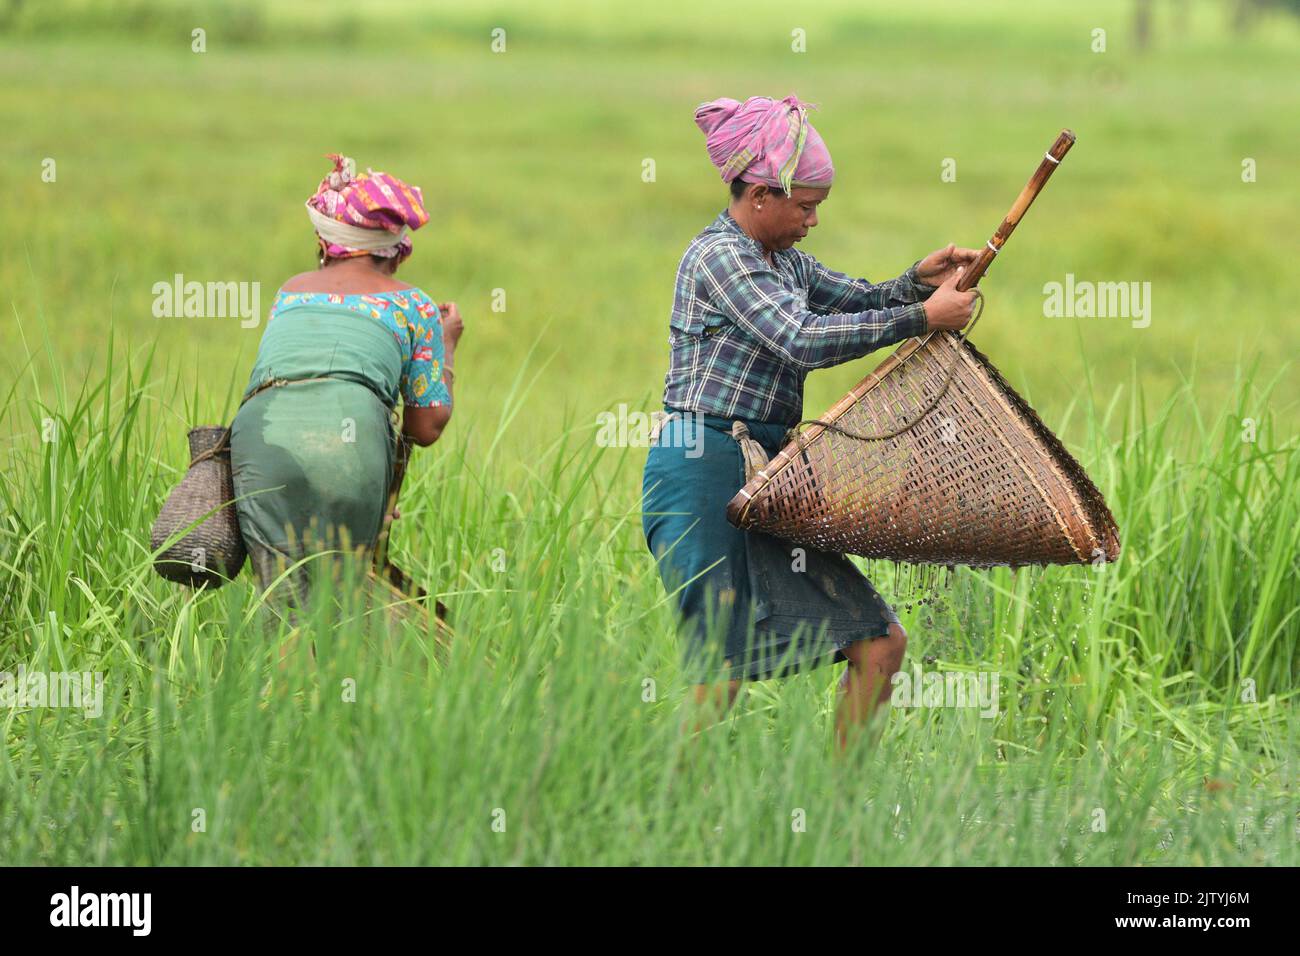 Nagaon. 2nd Sep, 2022. People catch fish in a partially dried-up wetland at a village in Nagaon district of India's northeastern state of Assam, Sept. 2, 2022. Credit: Str/Xinhua/Alamy Live News Stock Photo